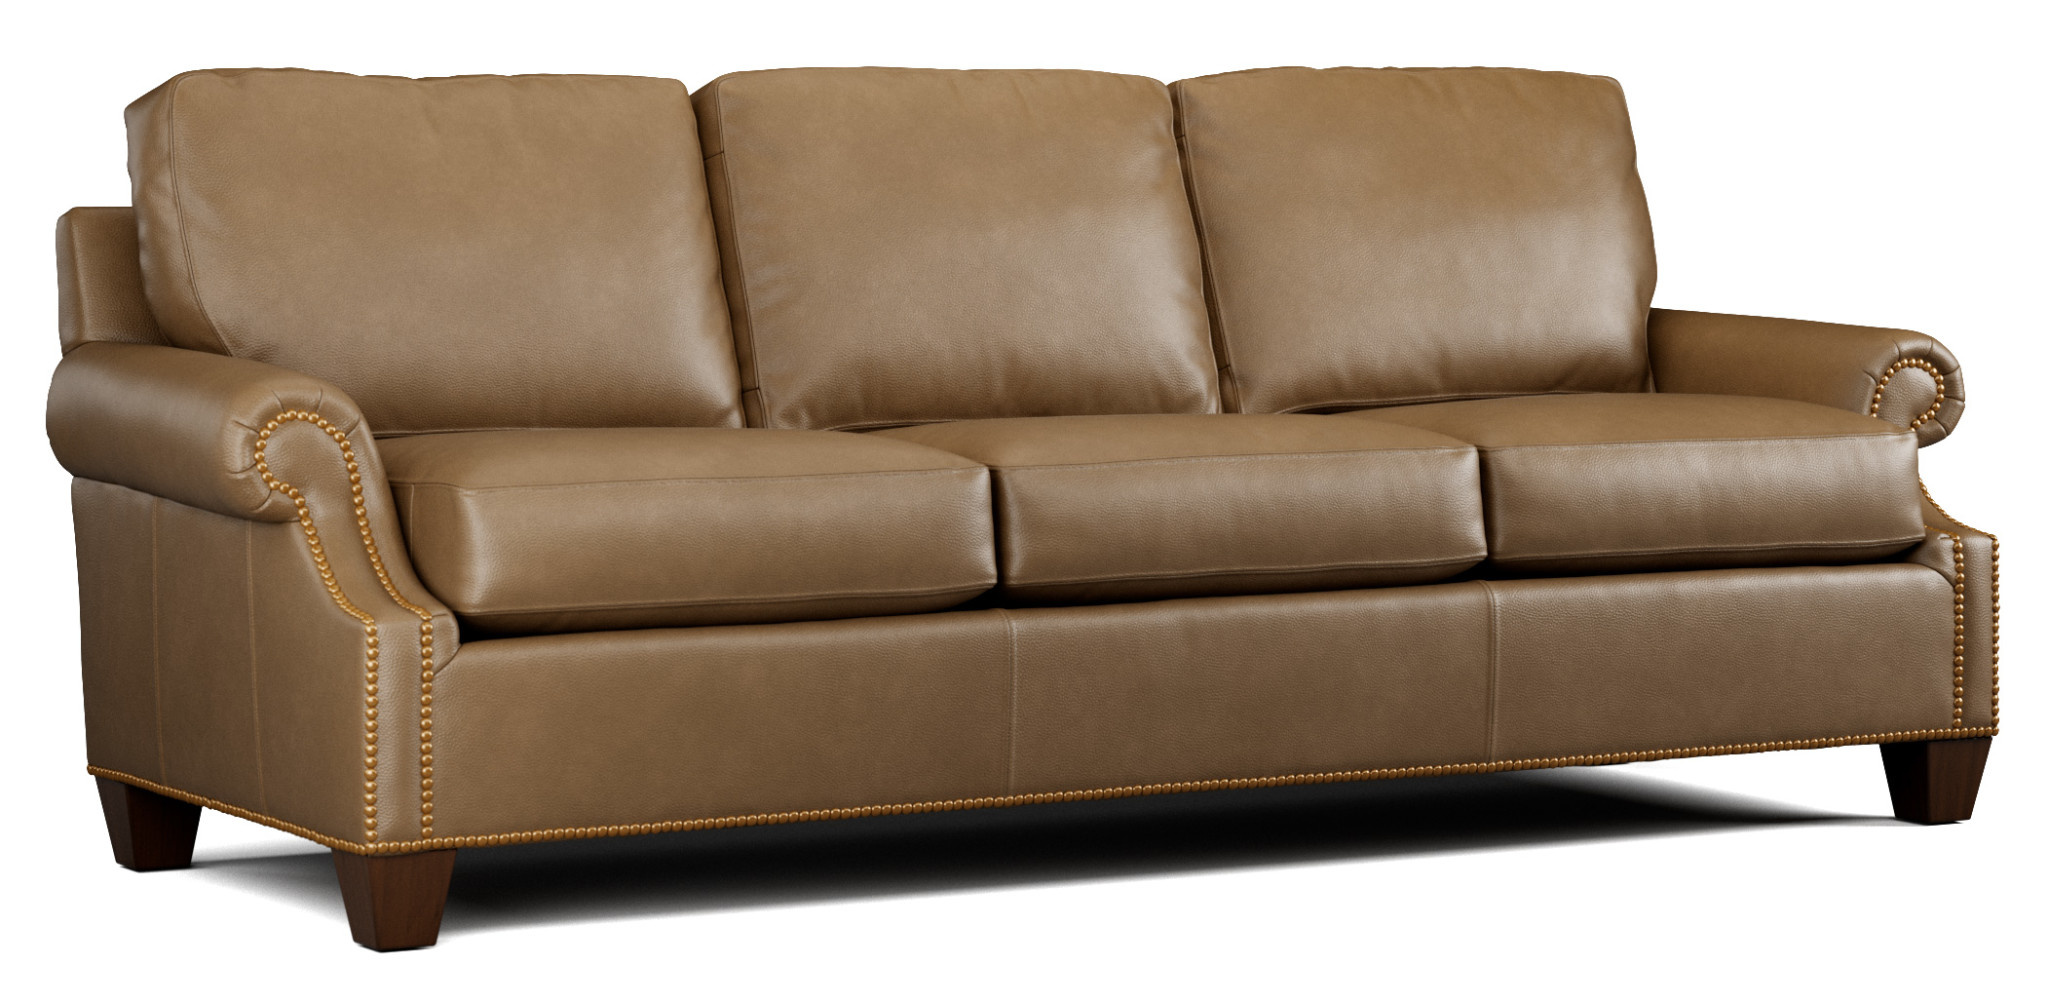 Whitmore Sherrill Whitmore Sherrill - Bentley Cigar Sofa 92 x 37 x 35 Customizable, Furniture Available for Local Delivery or Pick Up